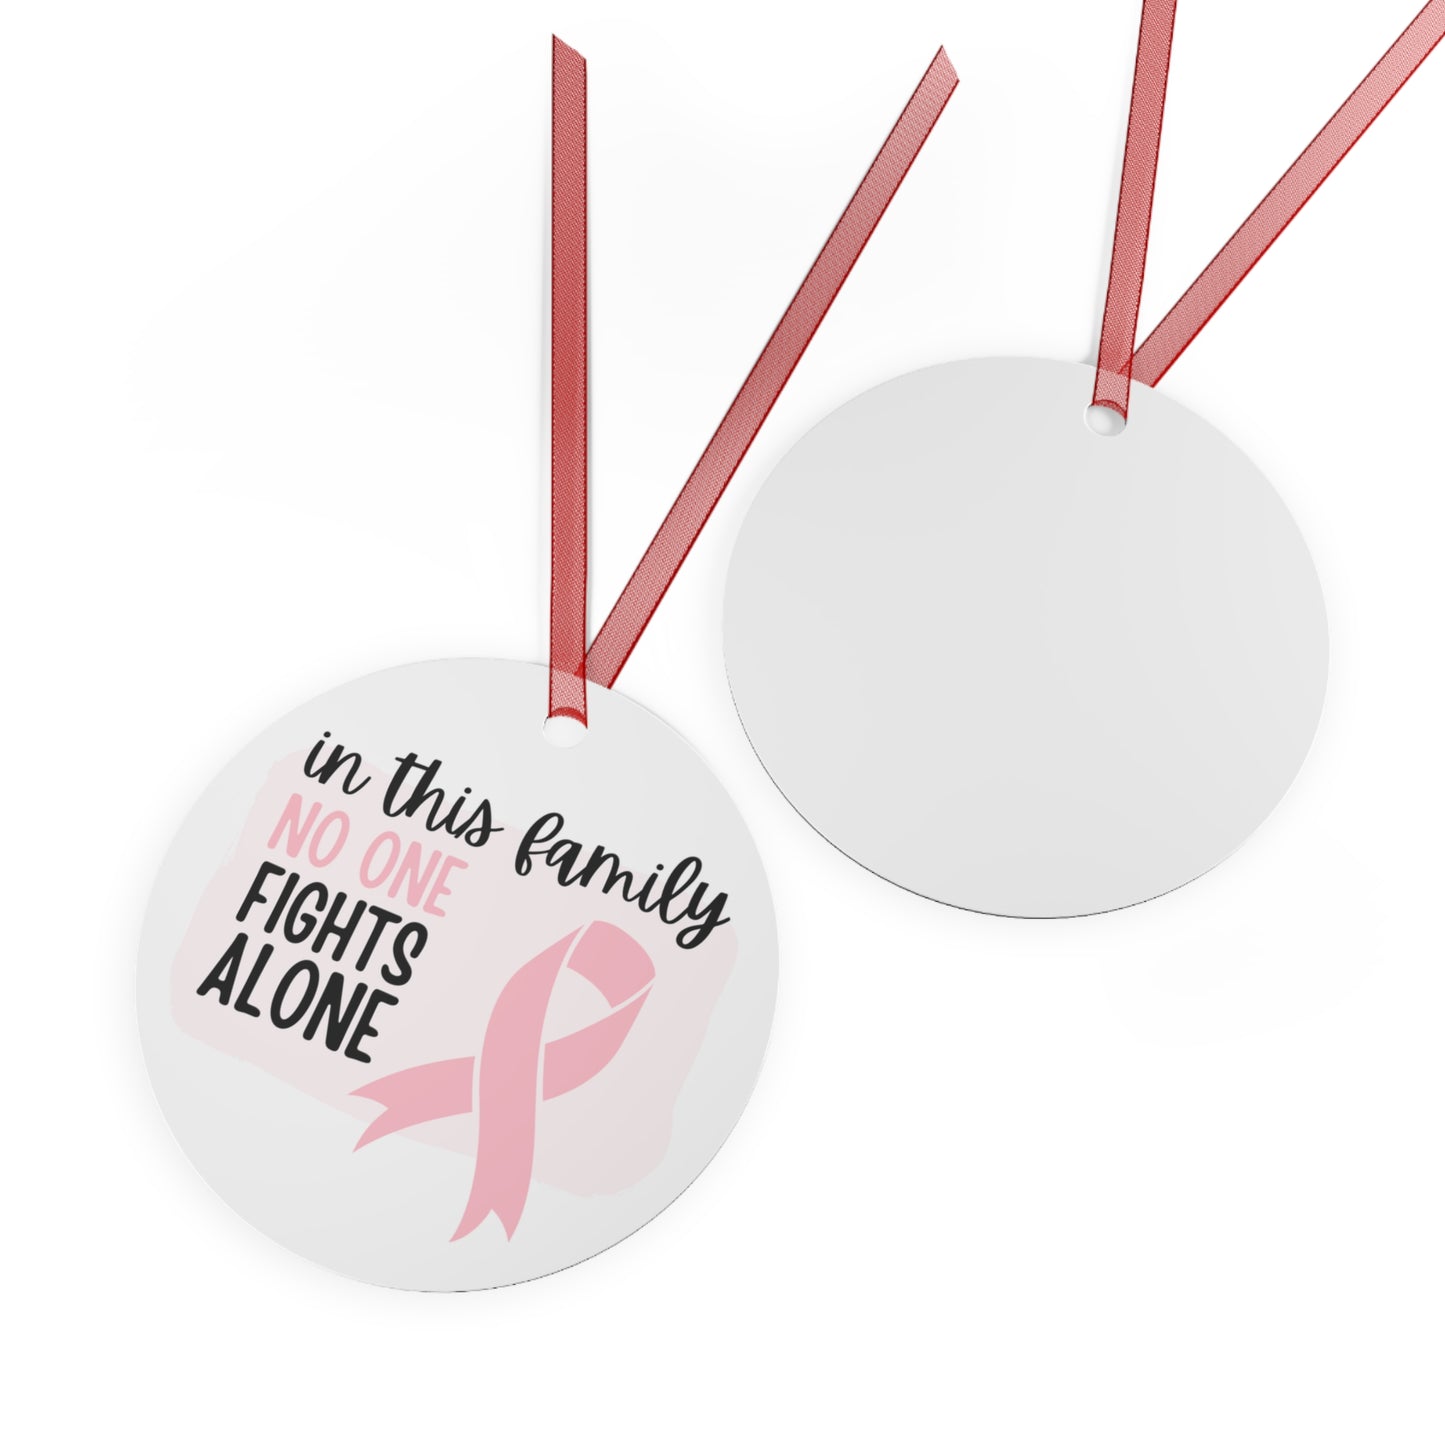 Breast Cancer Pink Ribbon Awareness Ornament -In this family no one fights alone- Family Support - Support for friend